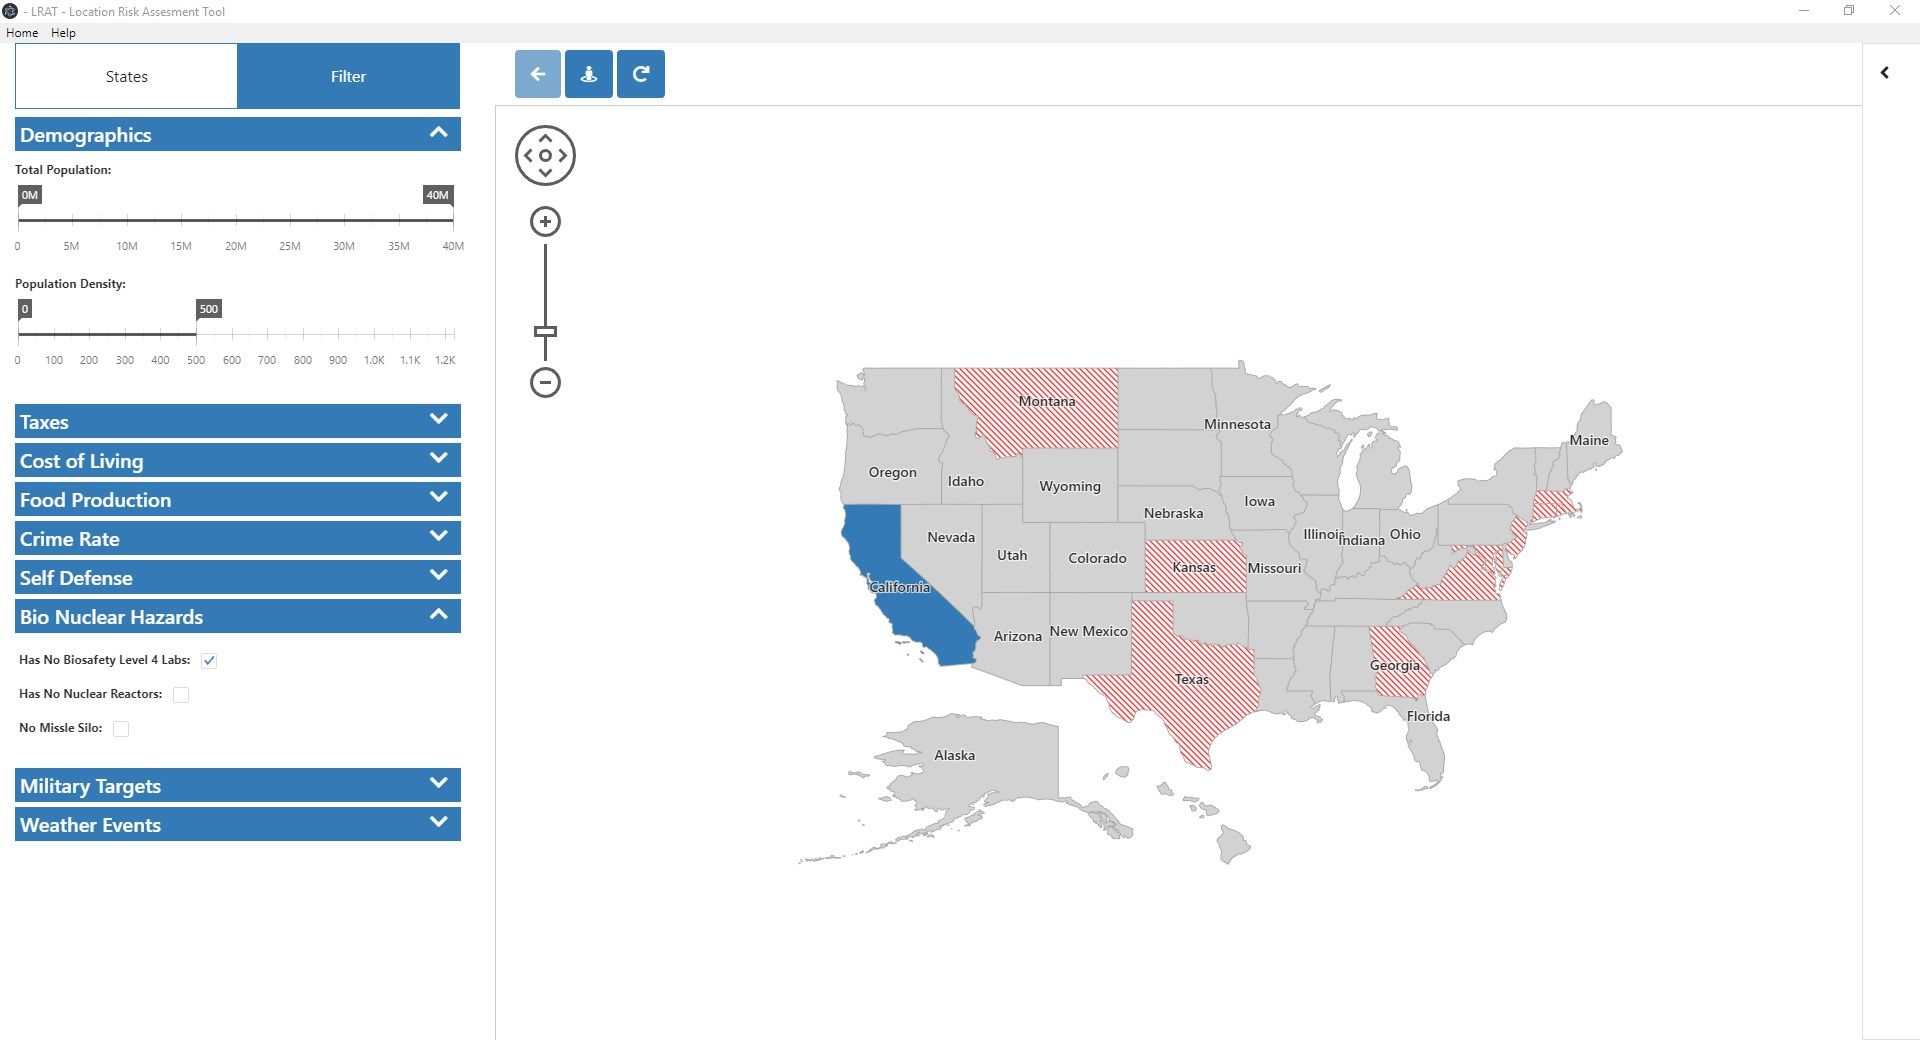 The County Filter lets you identify counties that meet your criteria